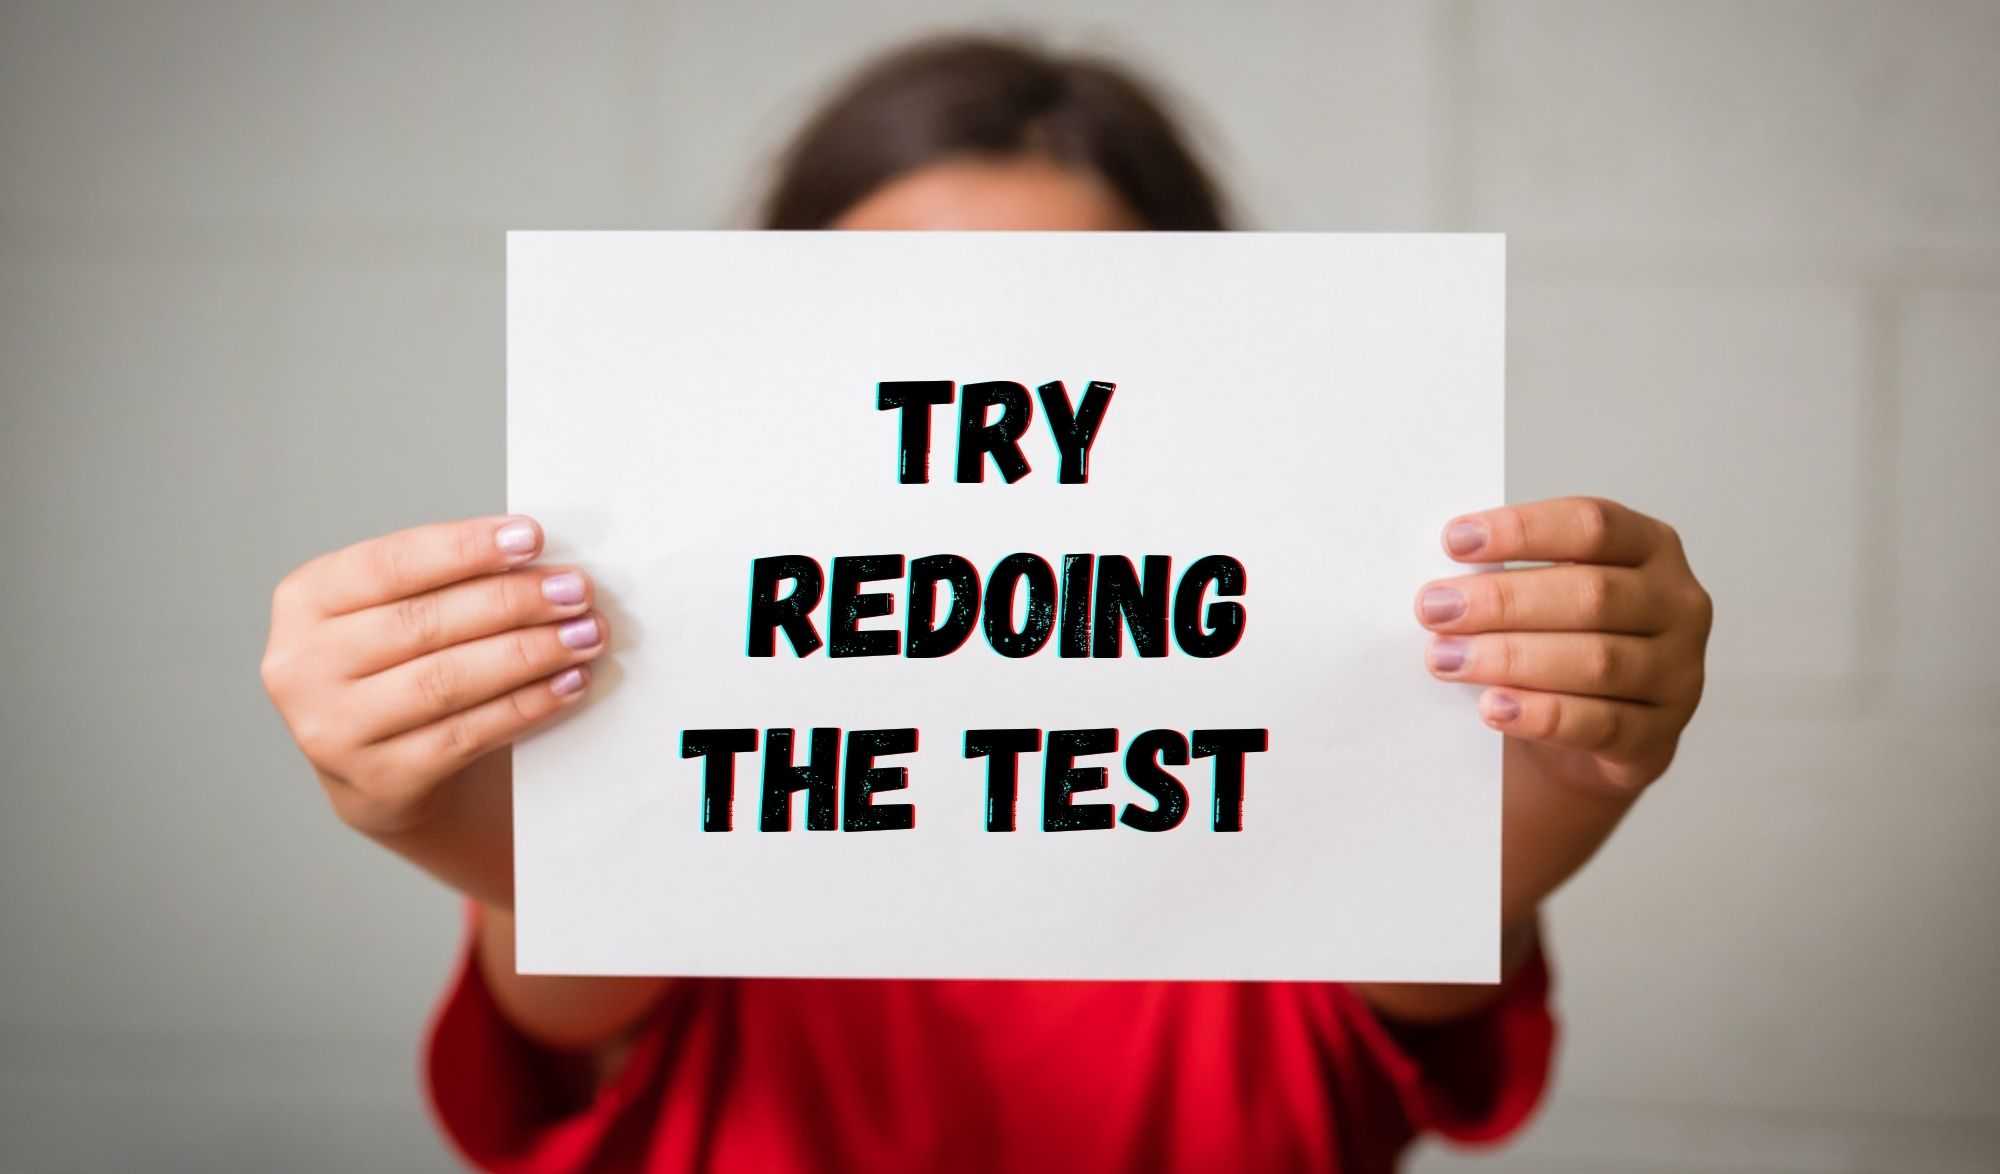 Try redoing the test